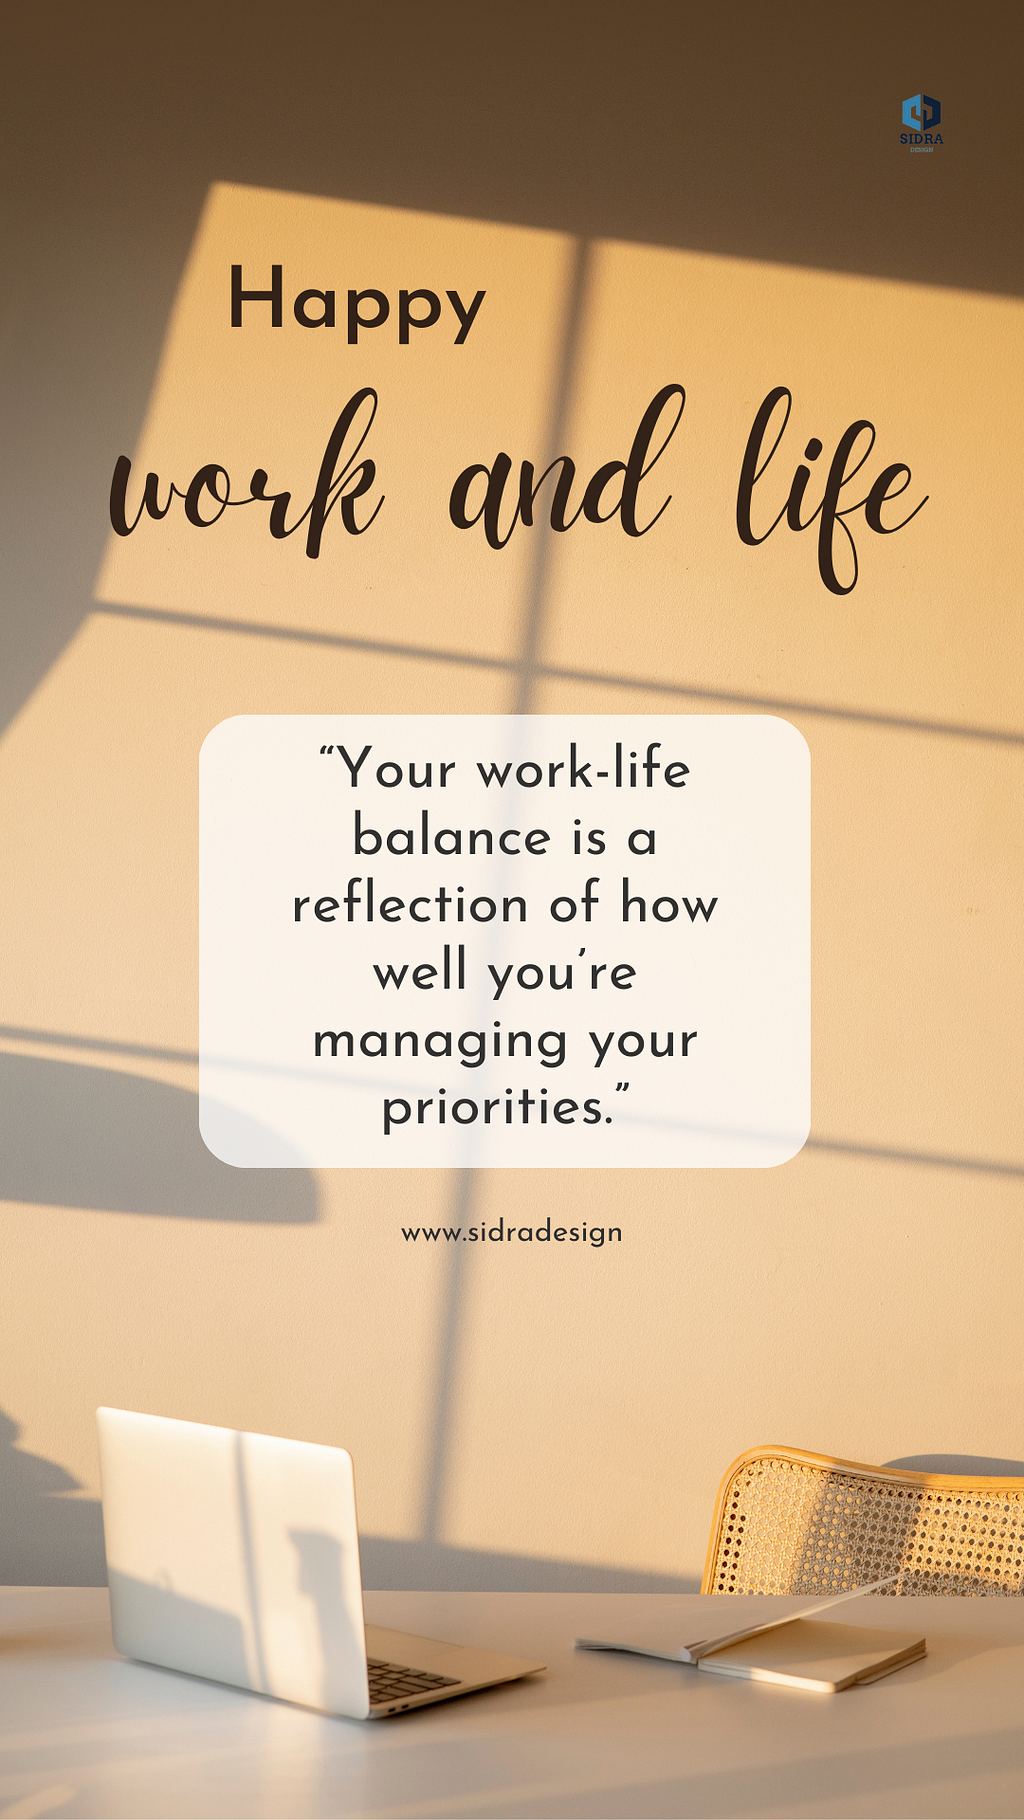 “Your work-life balance is a reflection of how well you’re managing your priorities.”